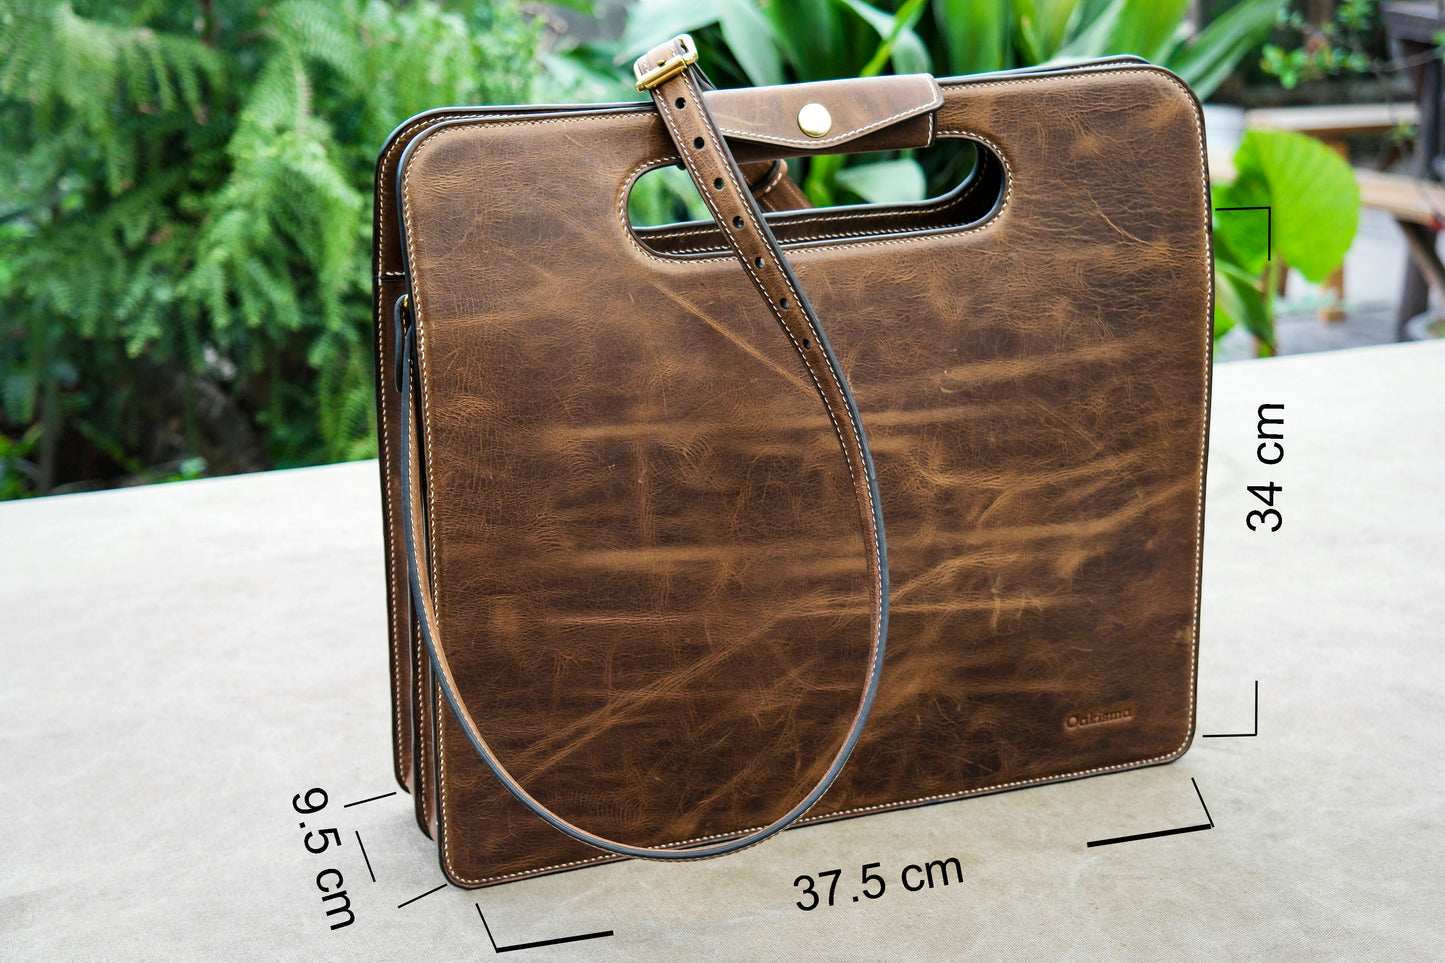 【PDF/Dxf Pattern】Portable briefcase,Briefcase For Files,Laptop bag Pattern,Men's Leather Briefcase Pattern